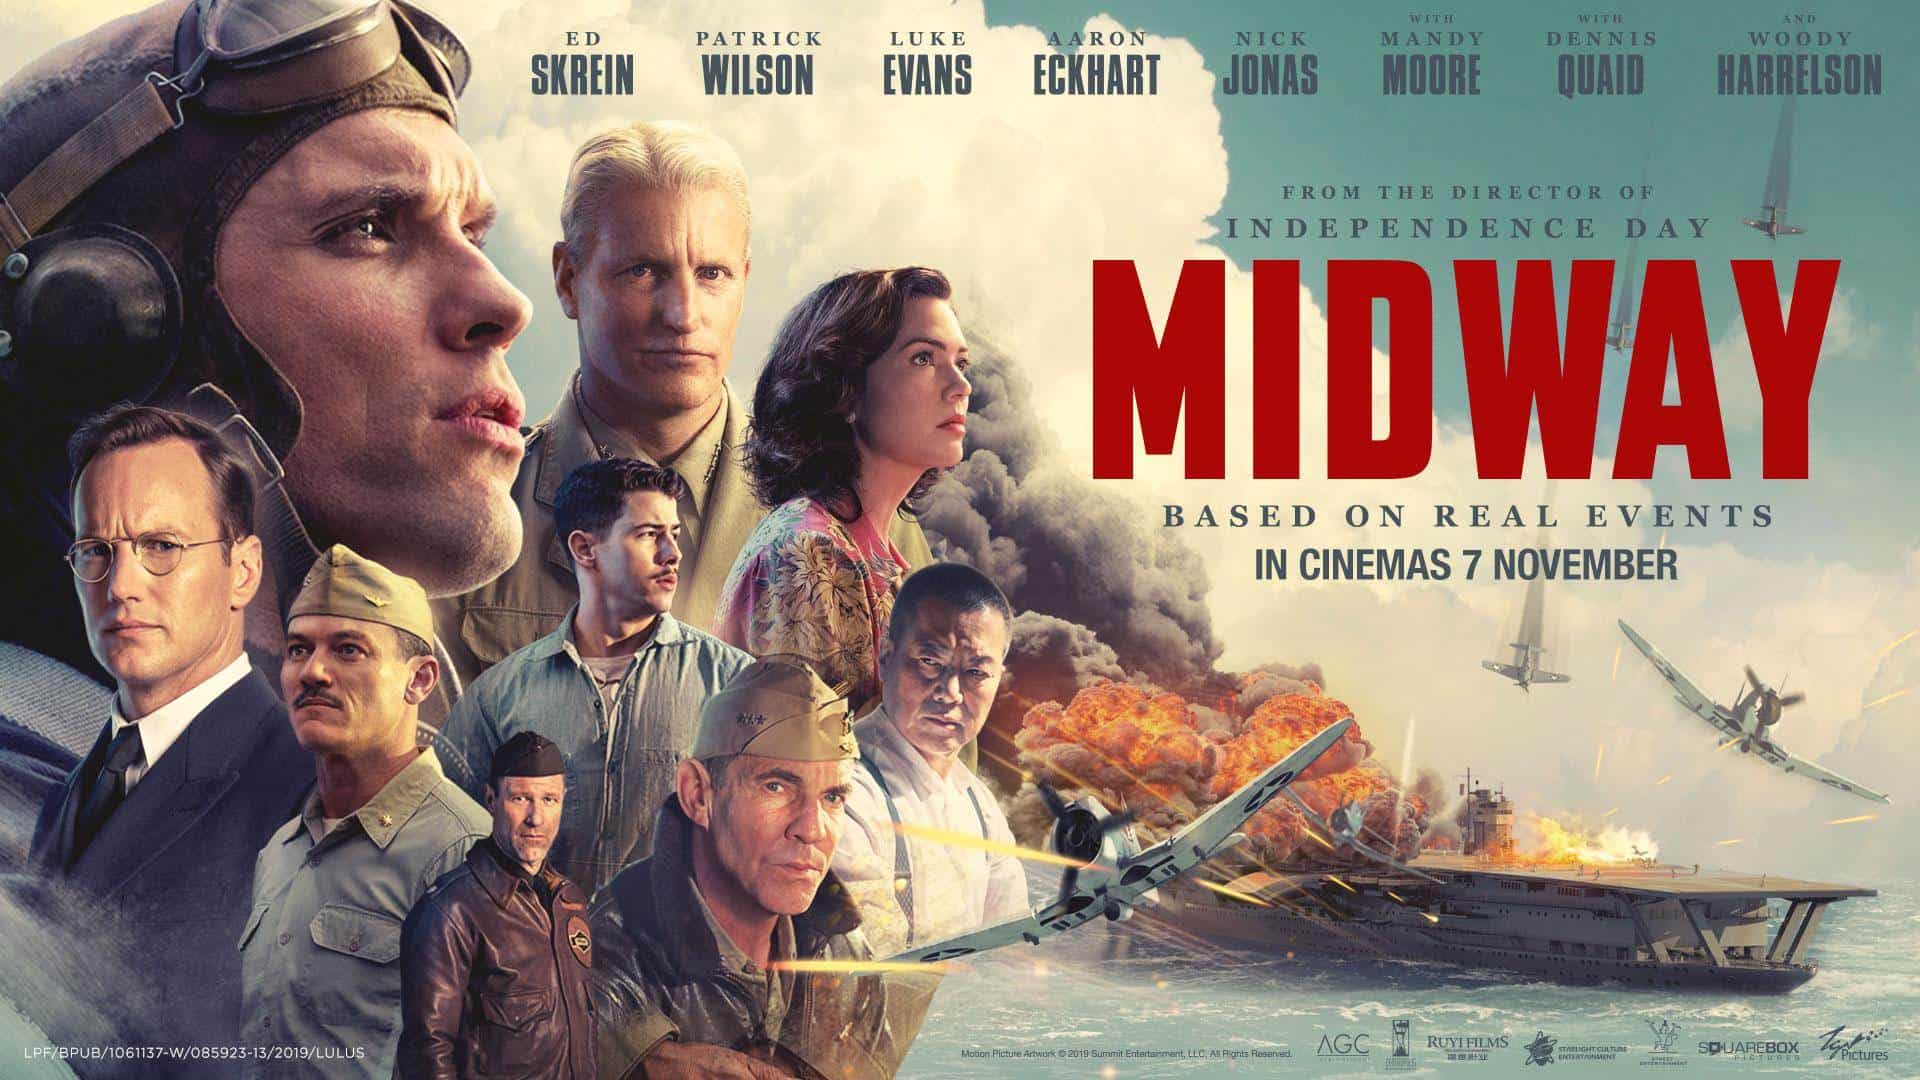 Download Midway (2019) 1080p + 2160p 4K HDR Google Drive